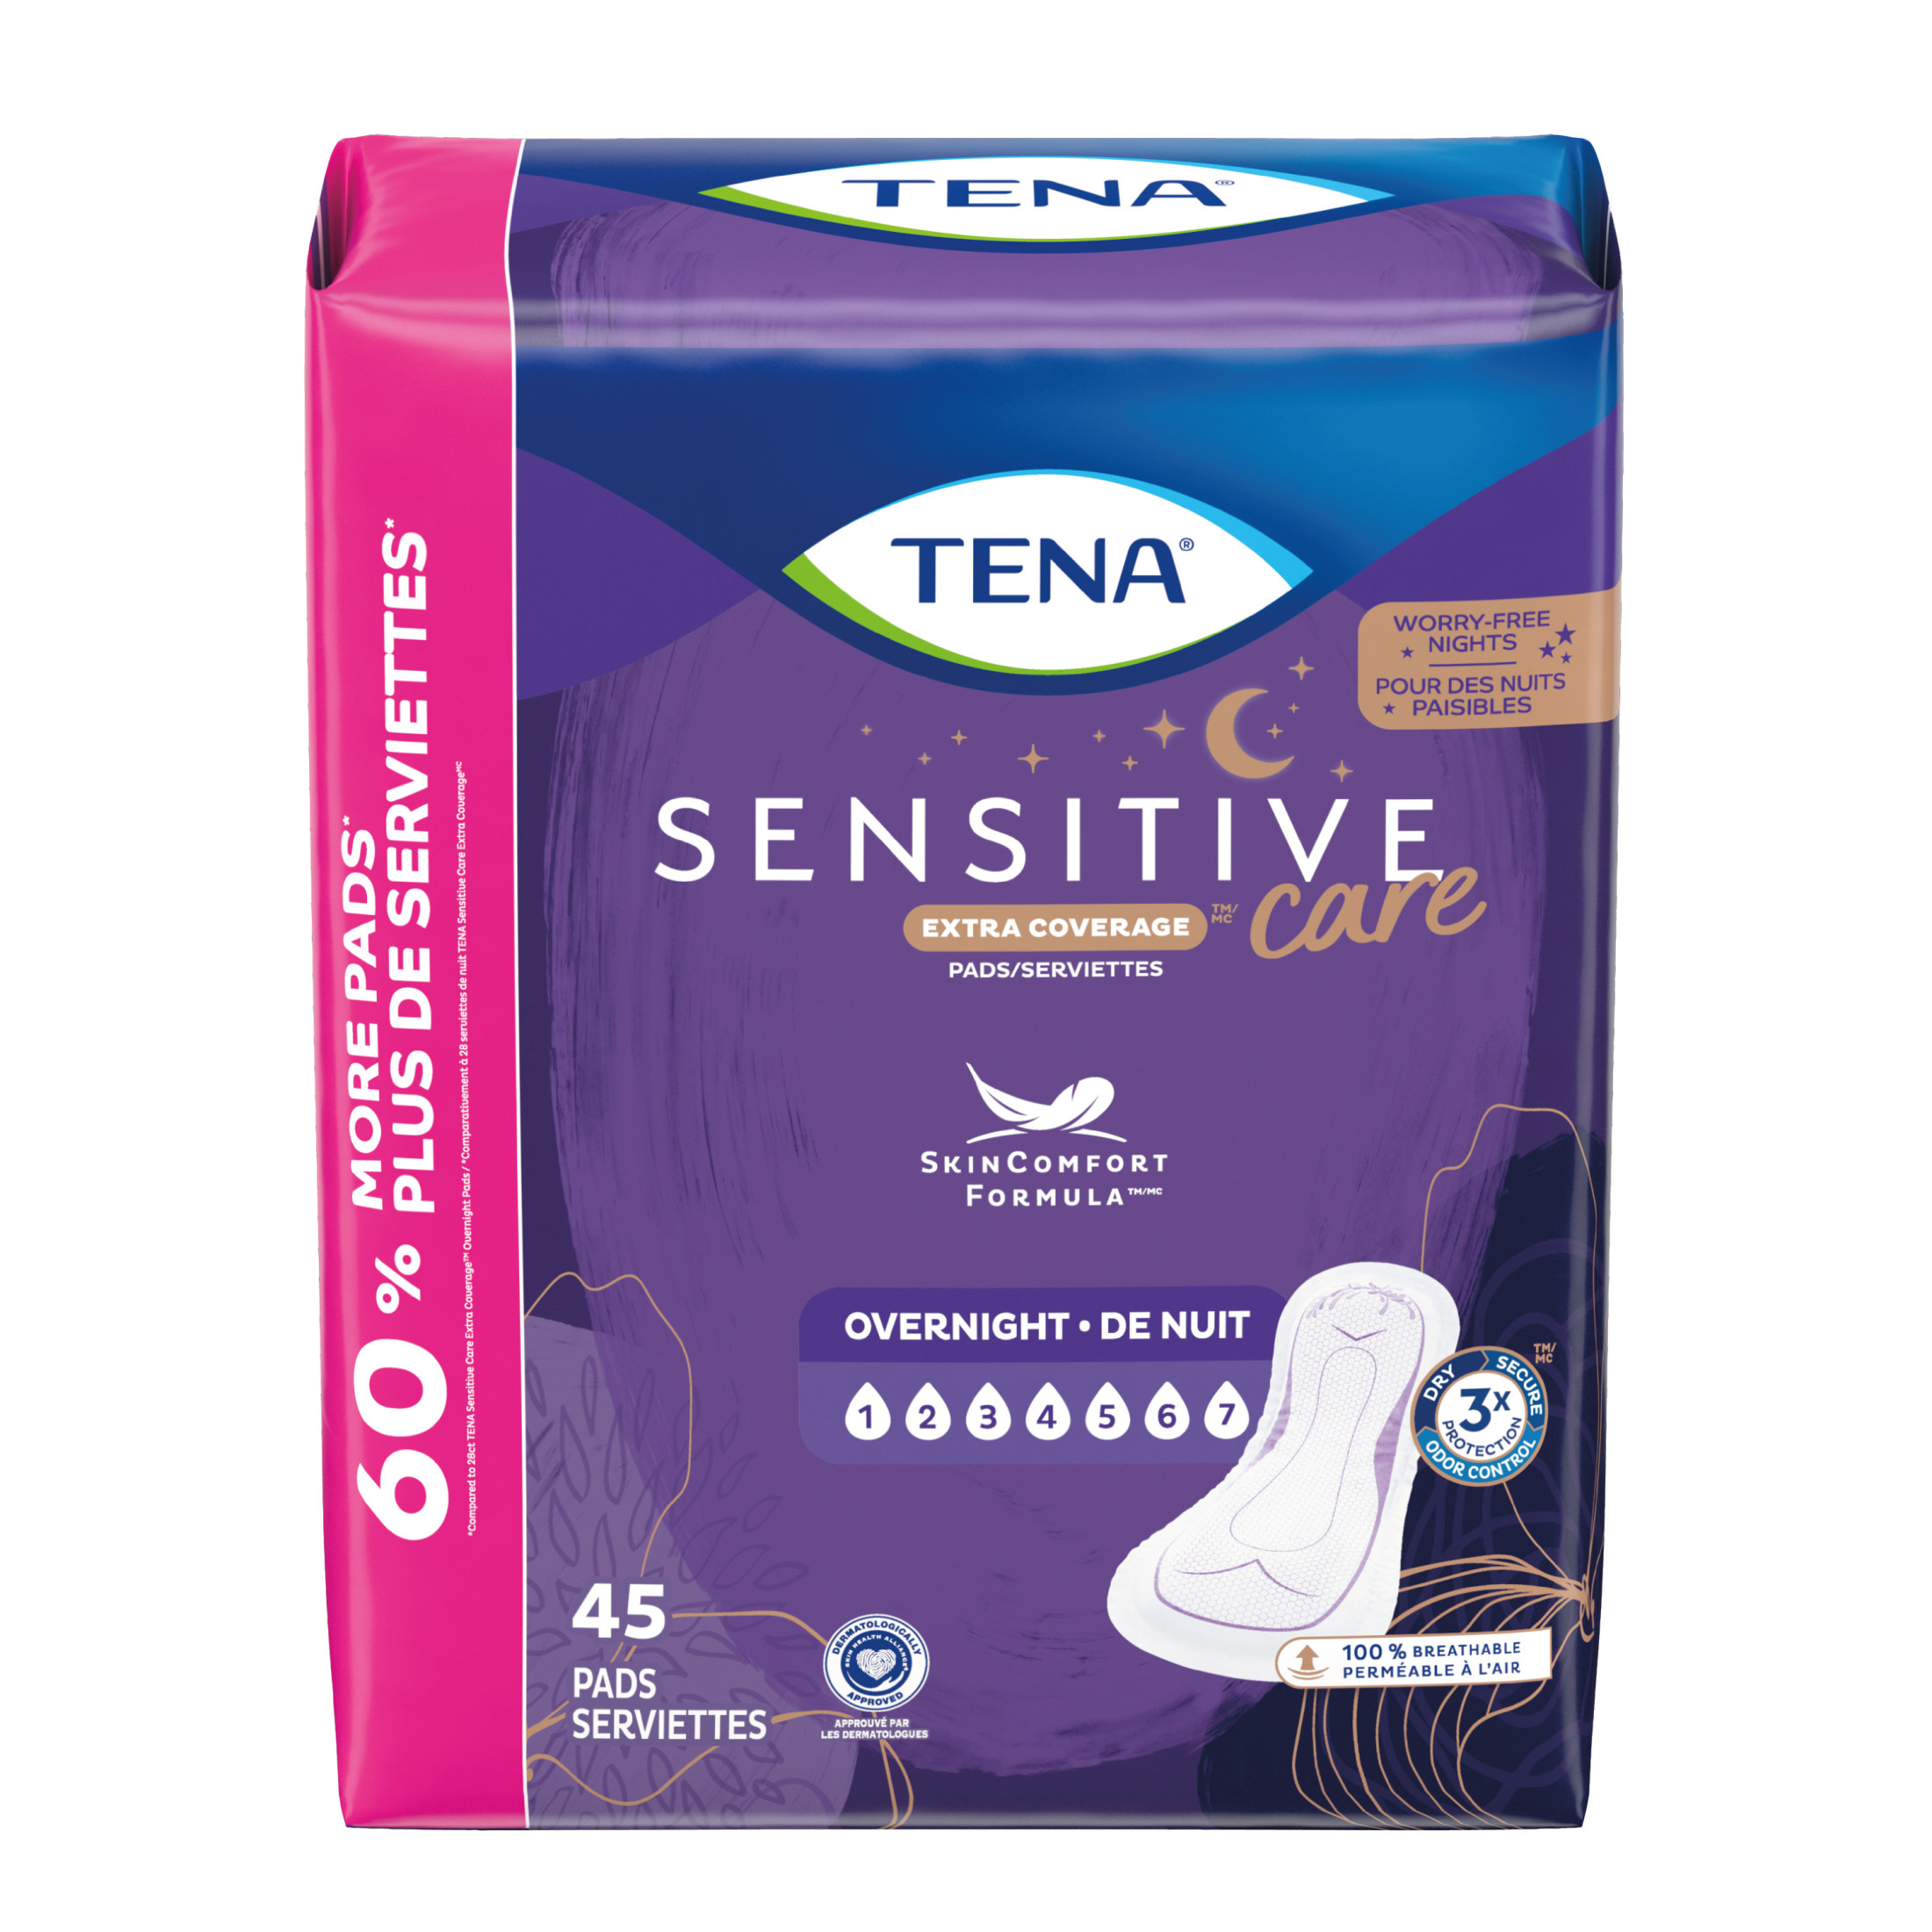 Tena Sensitive Care Extra Coverage Overnight Incontinence Pads, 45 Count - image 2 of 8